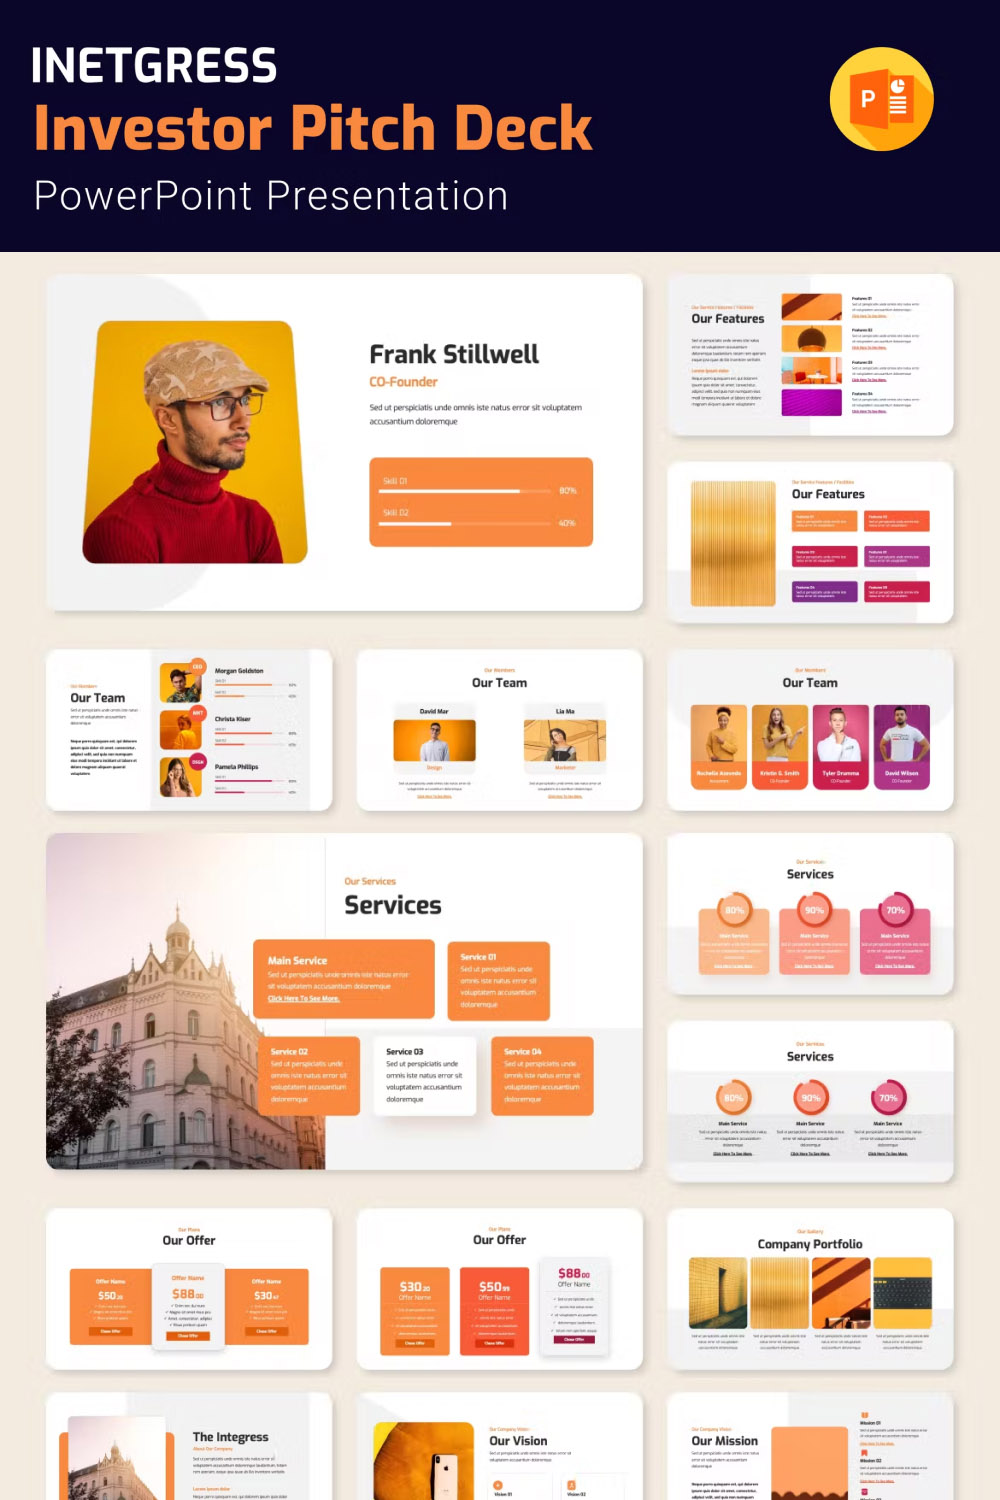 Investor pitch deck ppt template of pinterest.